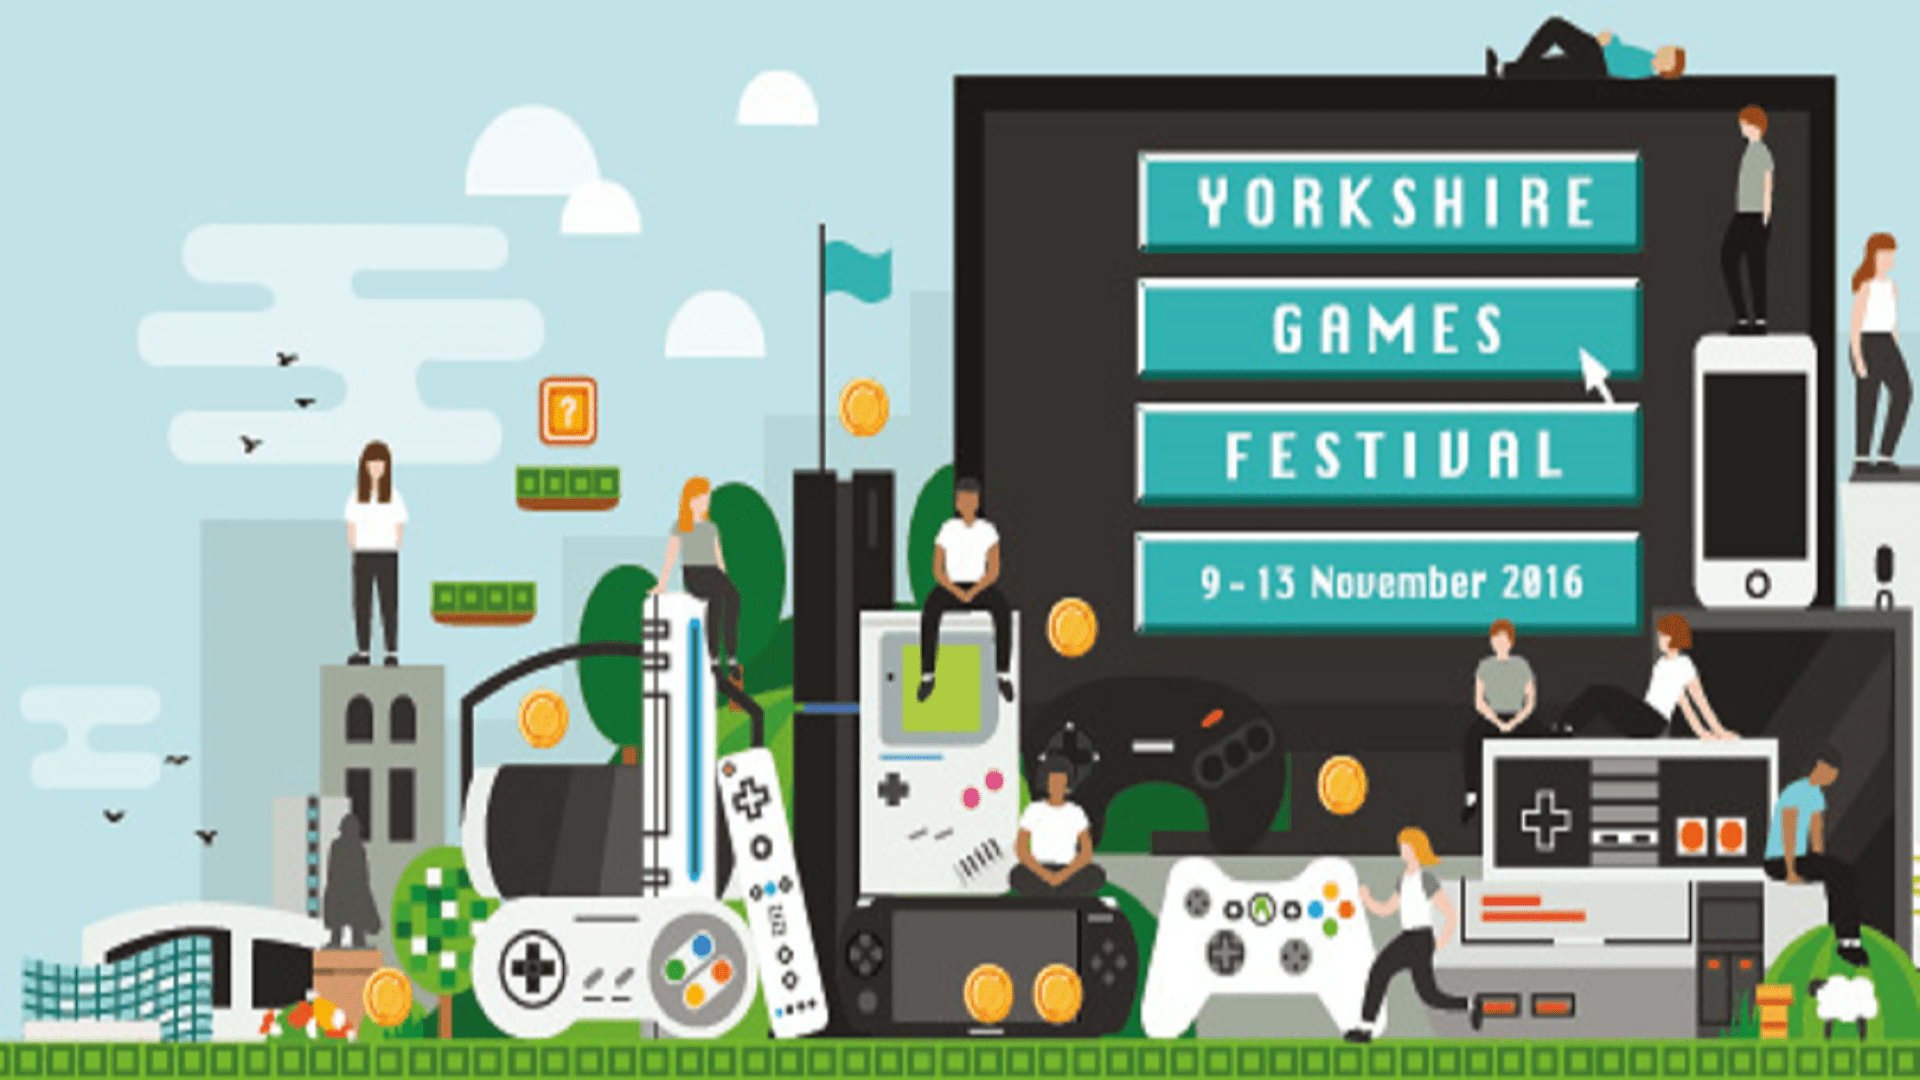 Yorkshire Games Festival 2016: Lineup Preview